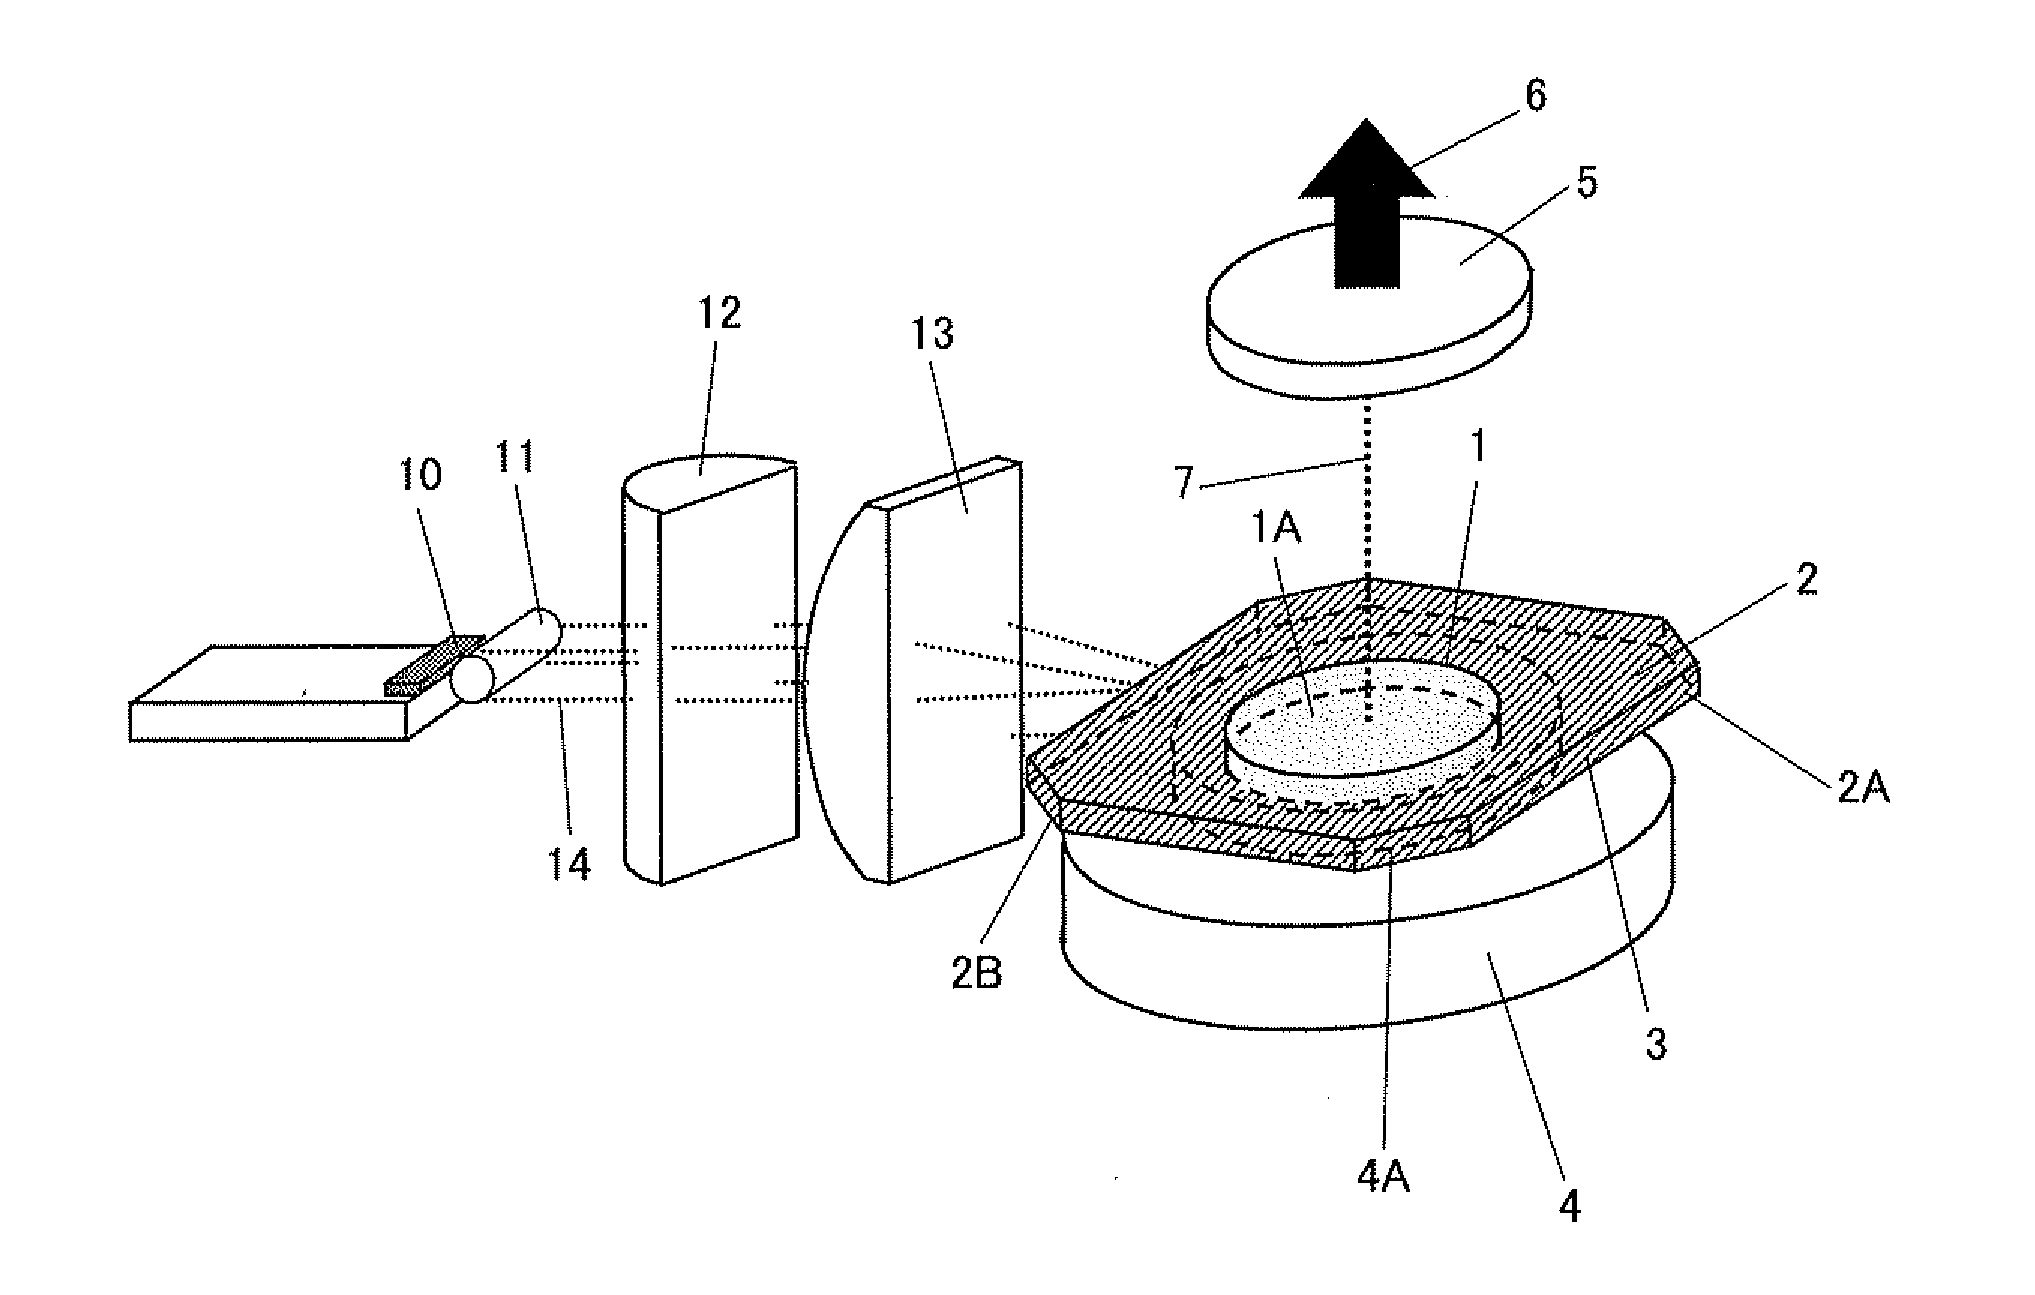 Semiconductor laser pumped solid-state laser device